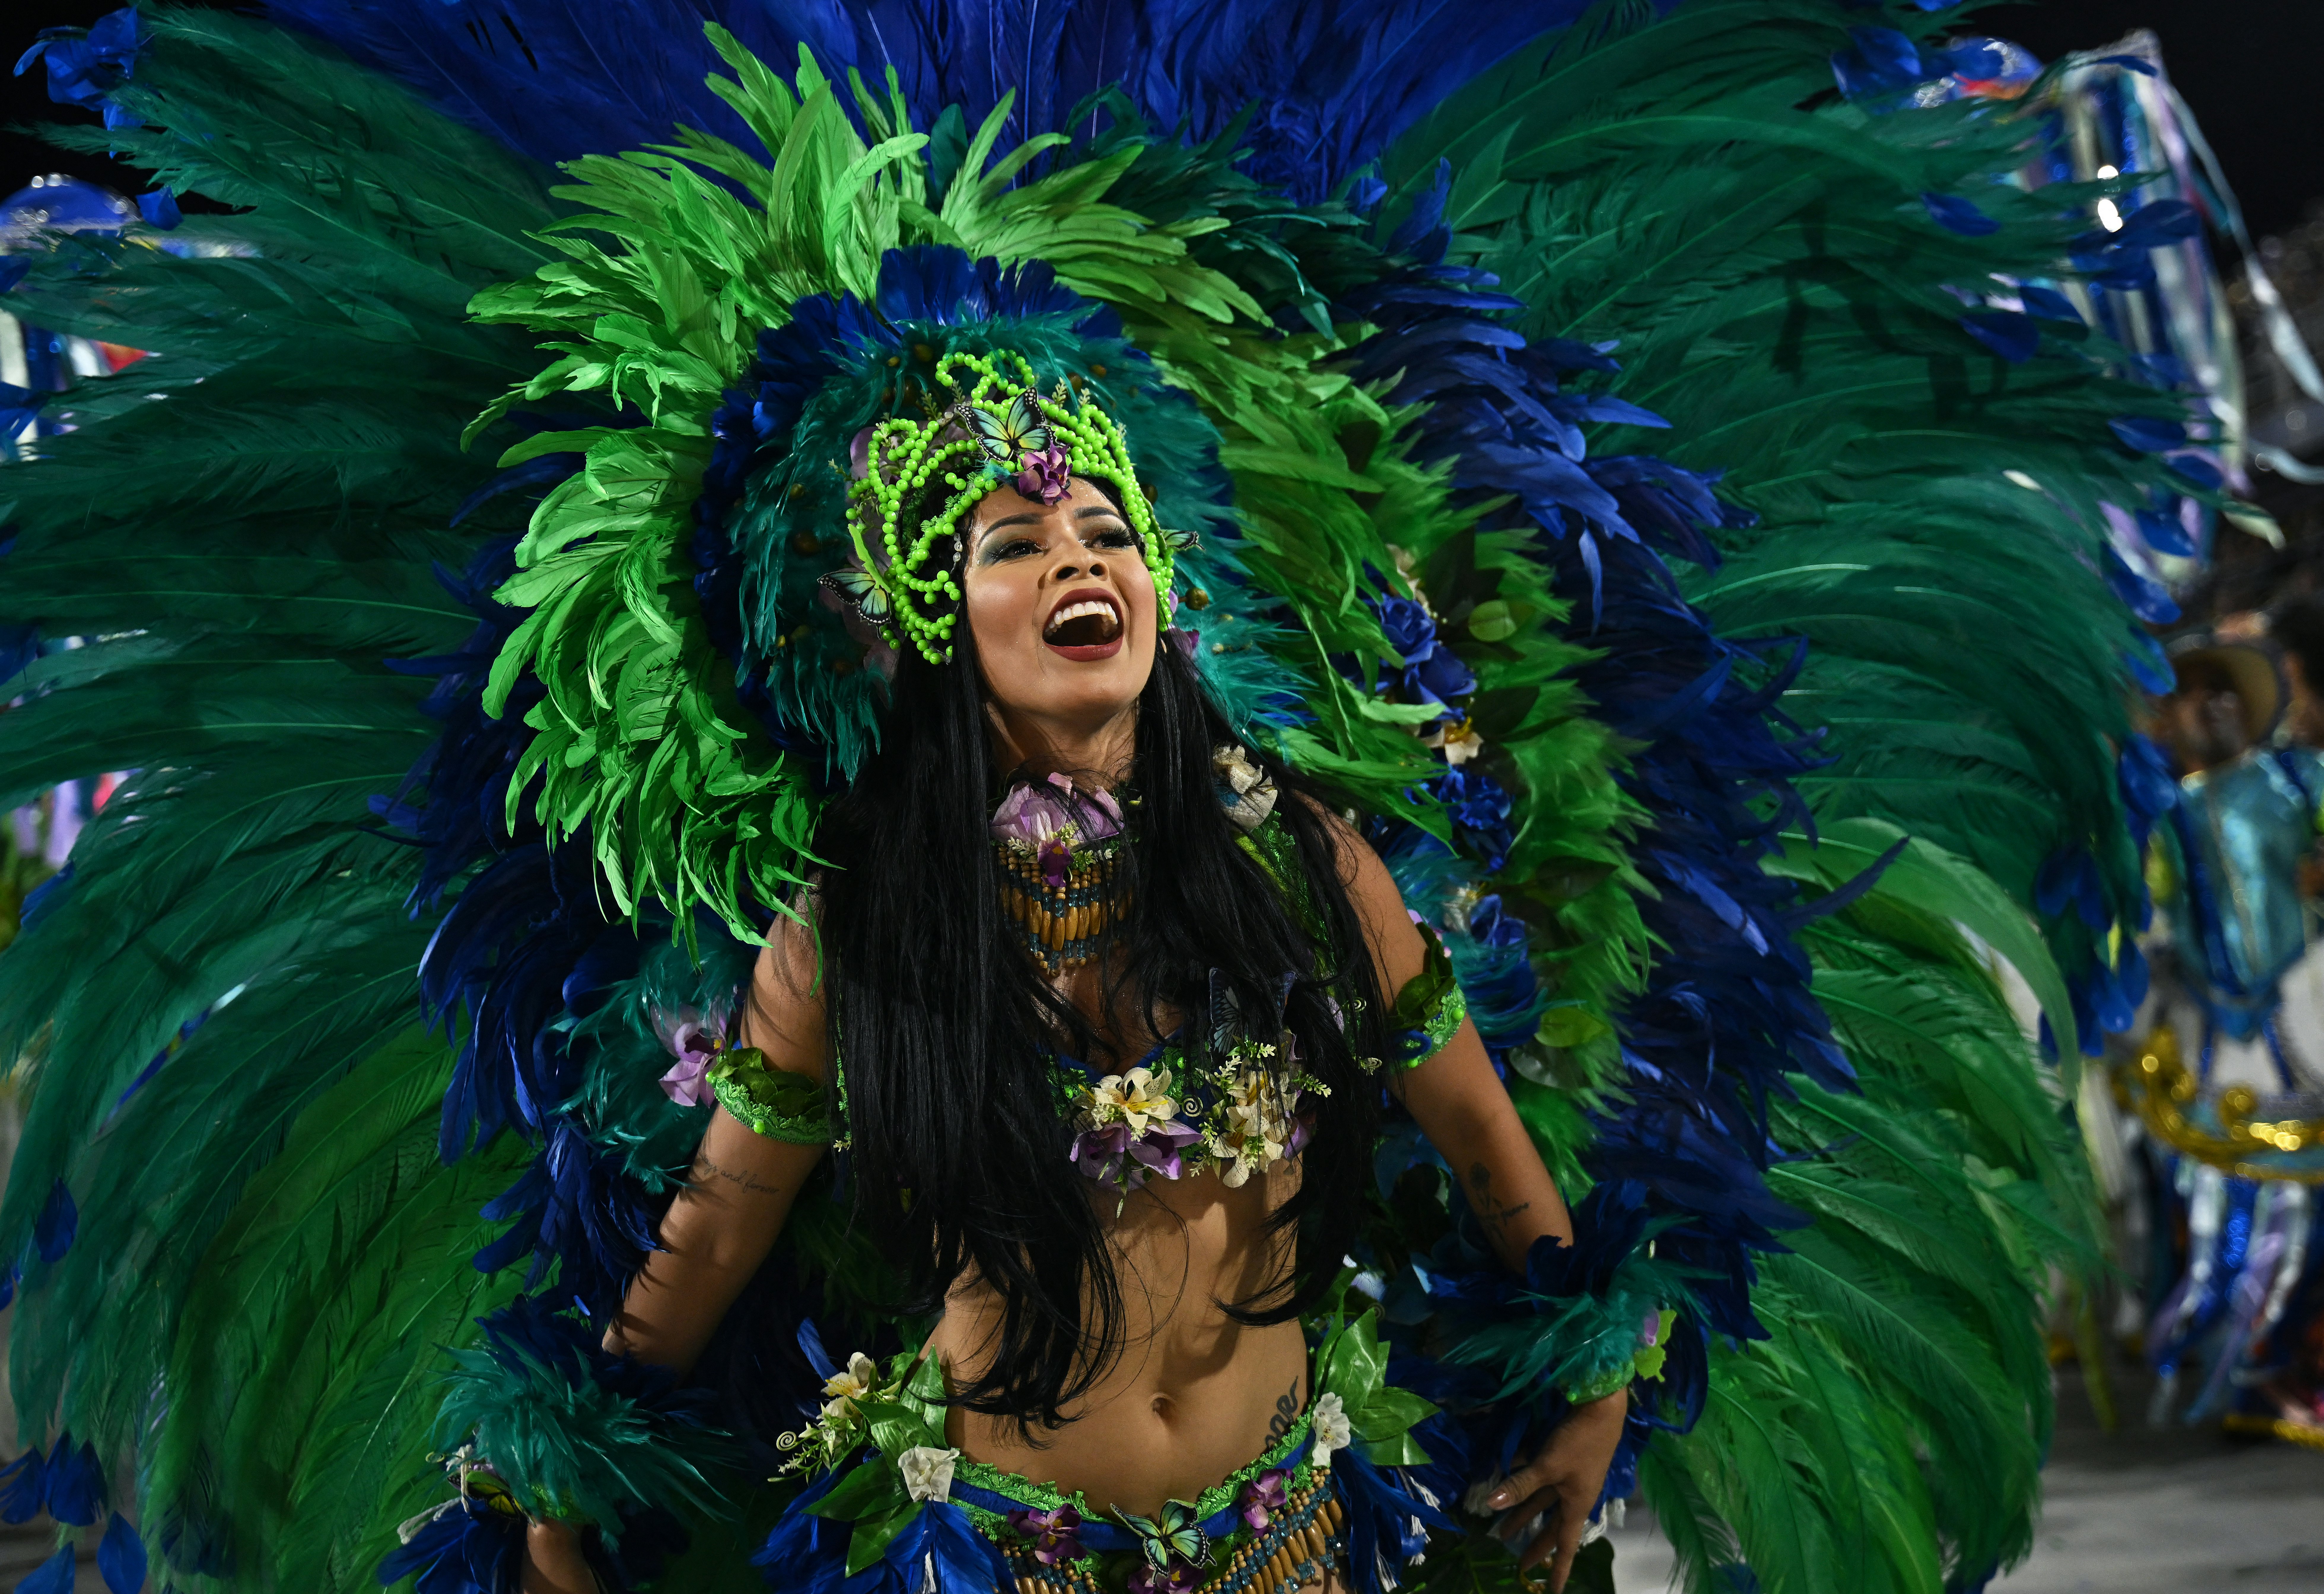 Rio de Janeiro is betting on Carnival for 'cooler' parties – and a